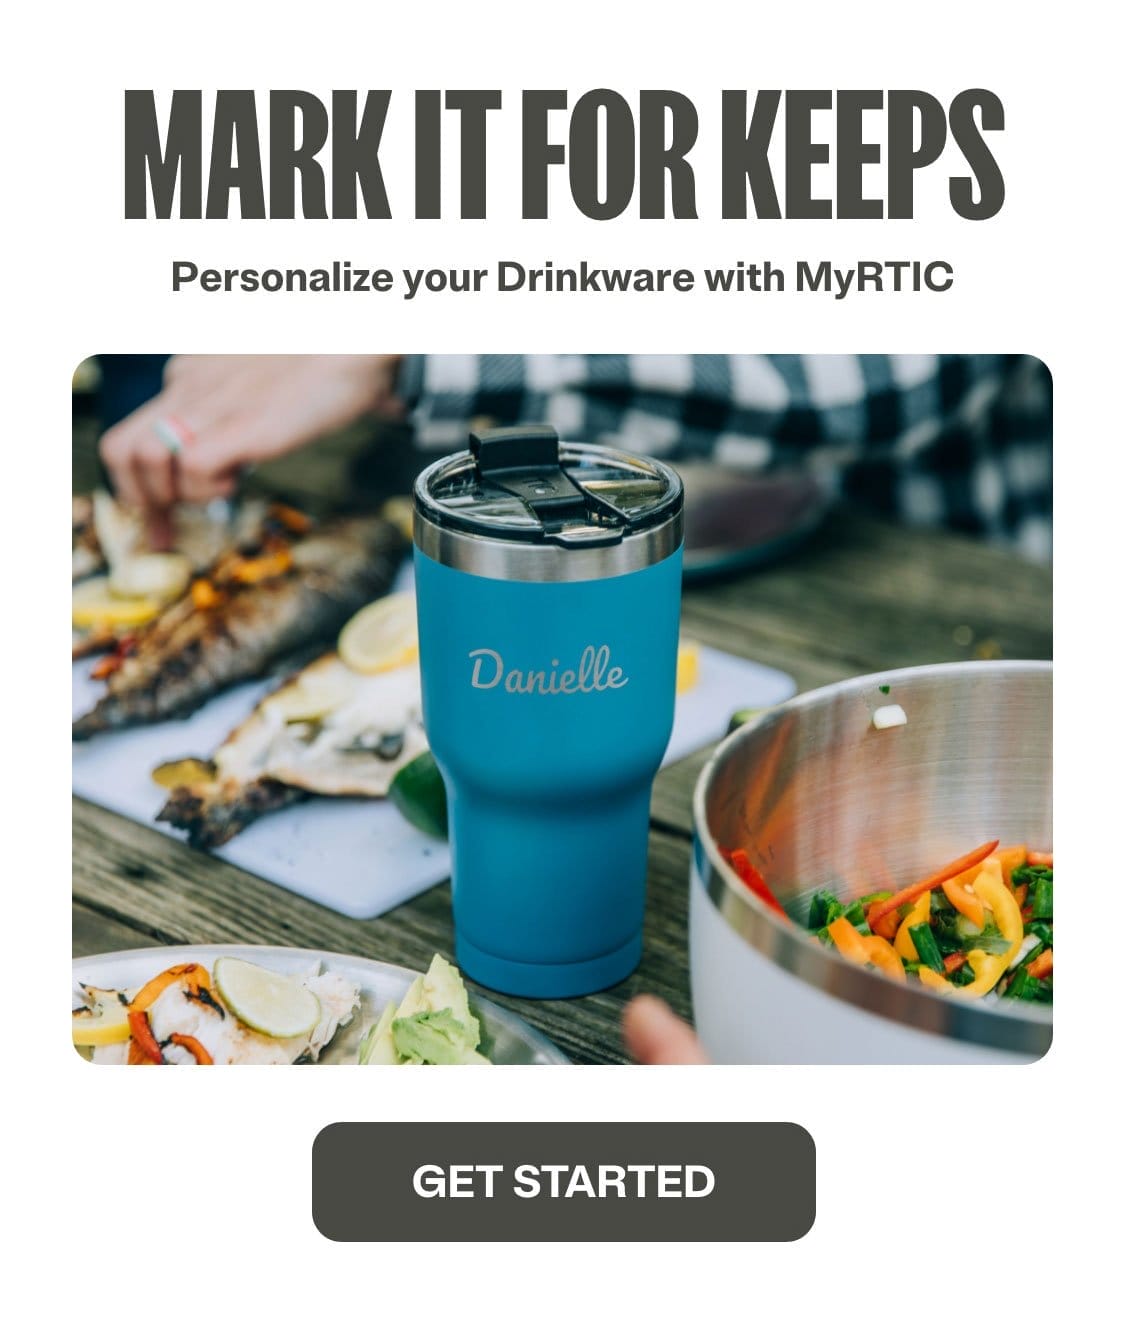 Mark it for keeps - personalize your drinkware with myRTIC.